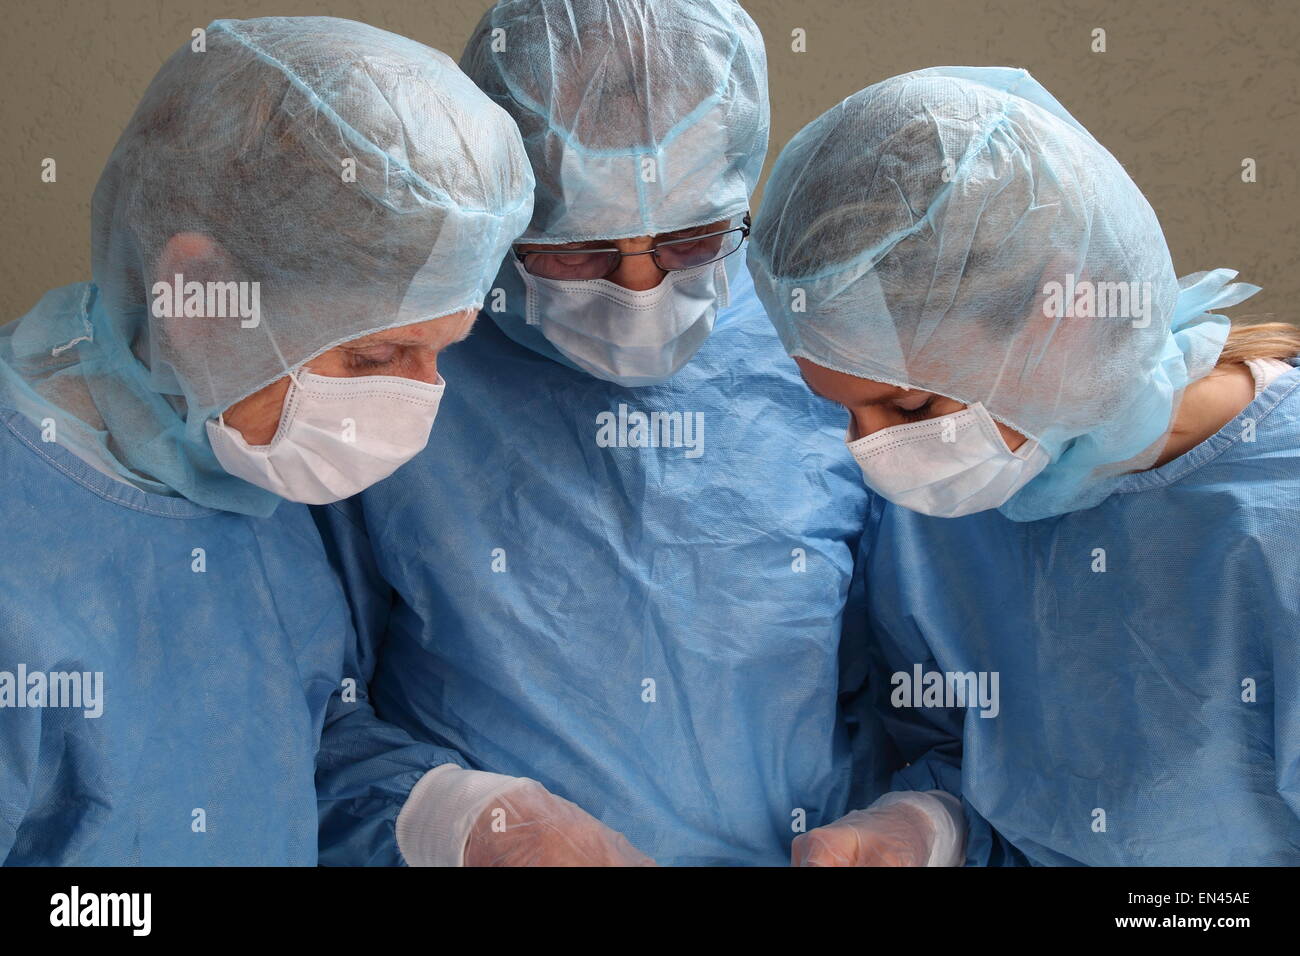 Three doctors working concentrated in a OP room Stock Photo